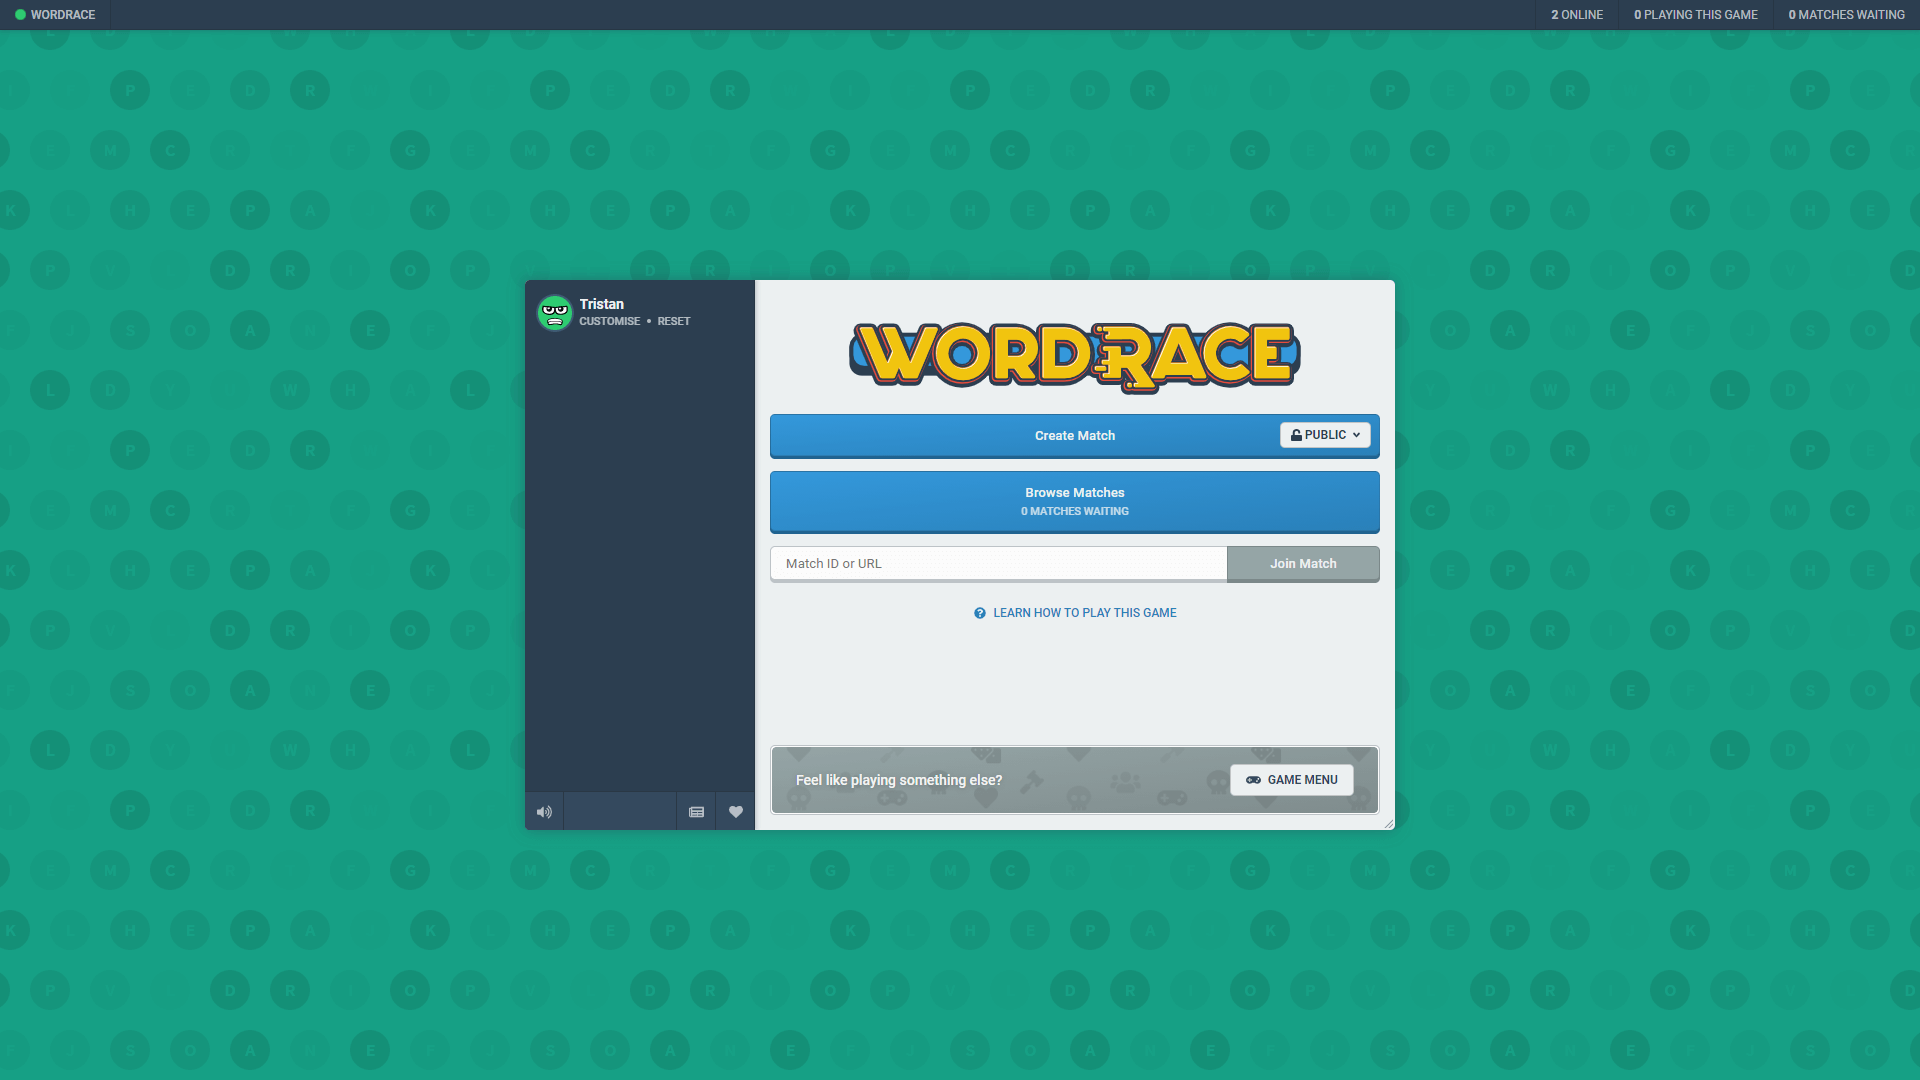 A screenshot of the Wordrace game on Bloob.io, specifically showing the menu where games can be made and available matches can be browsed.